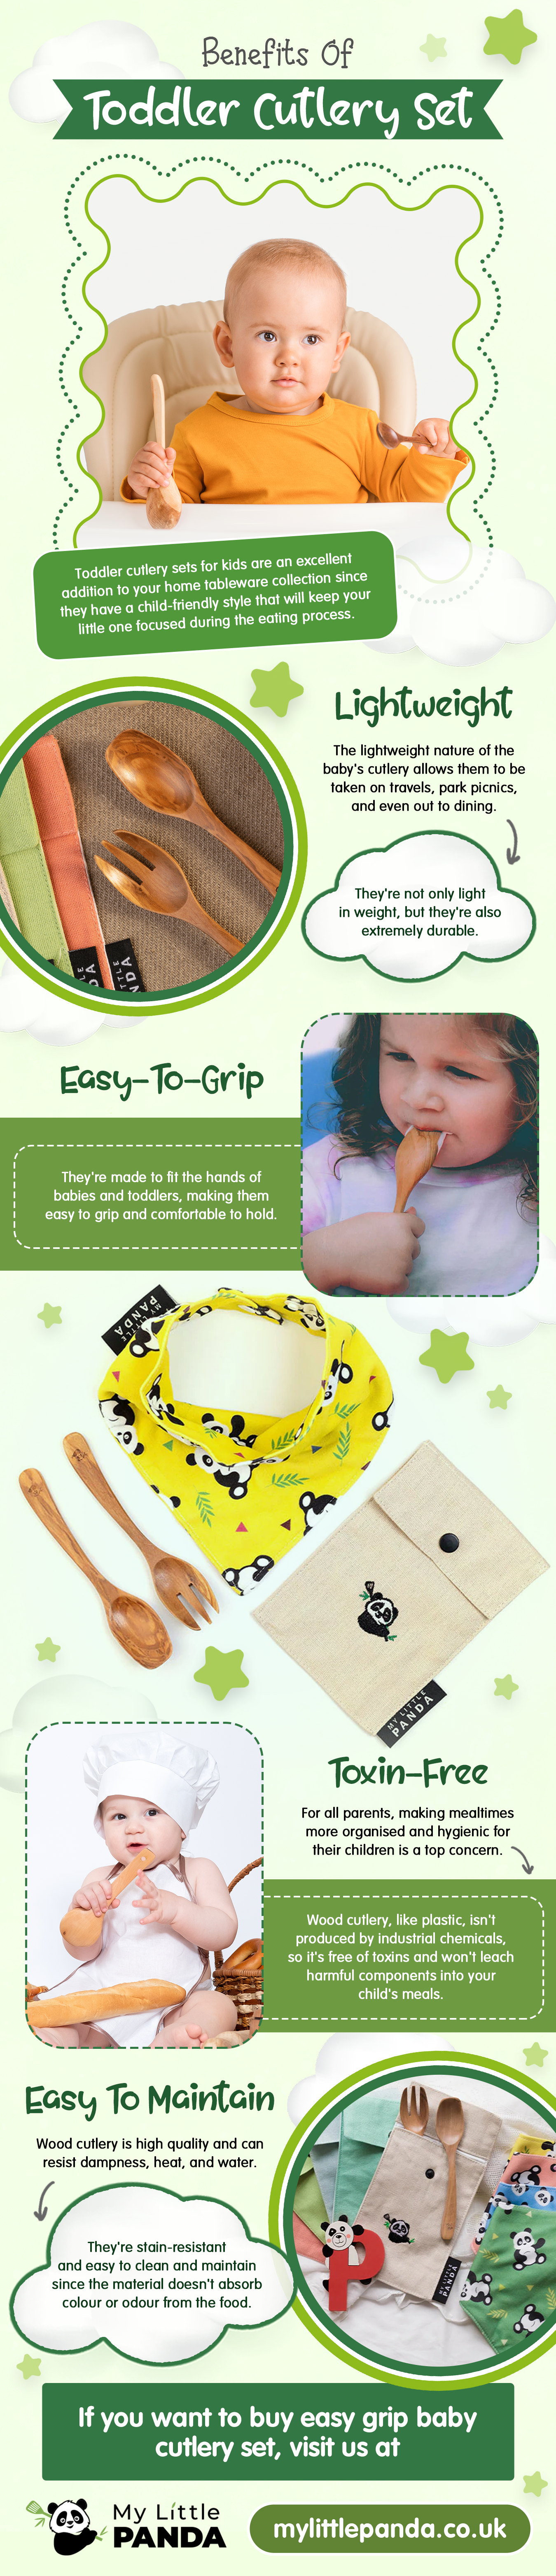 Benefits of Toddler Cutlery Set - Infograph